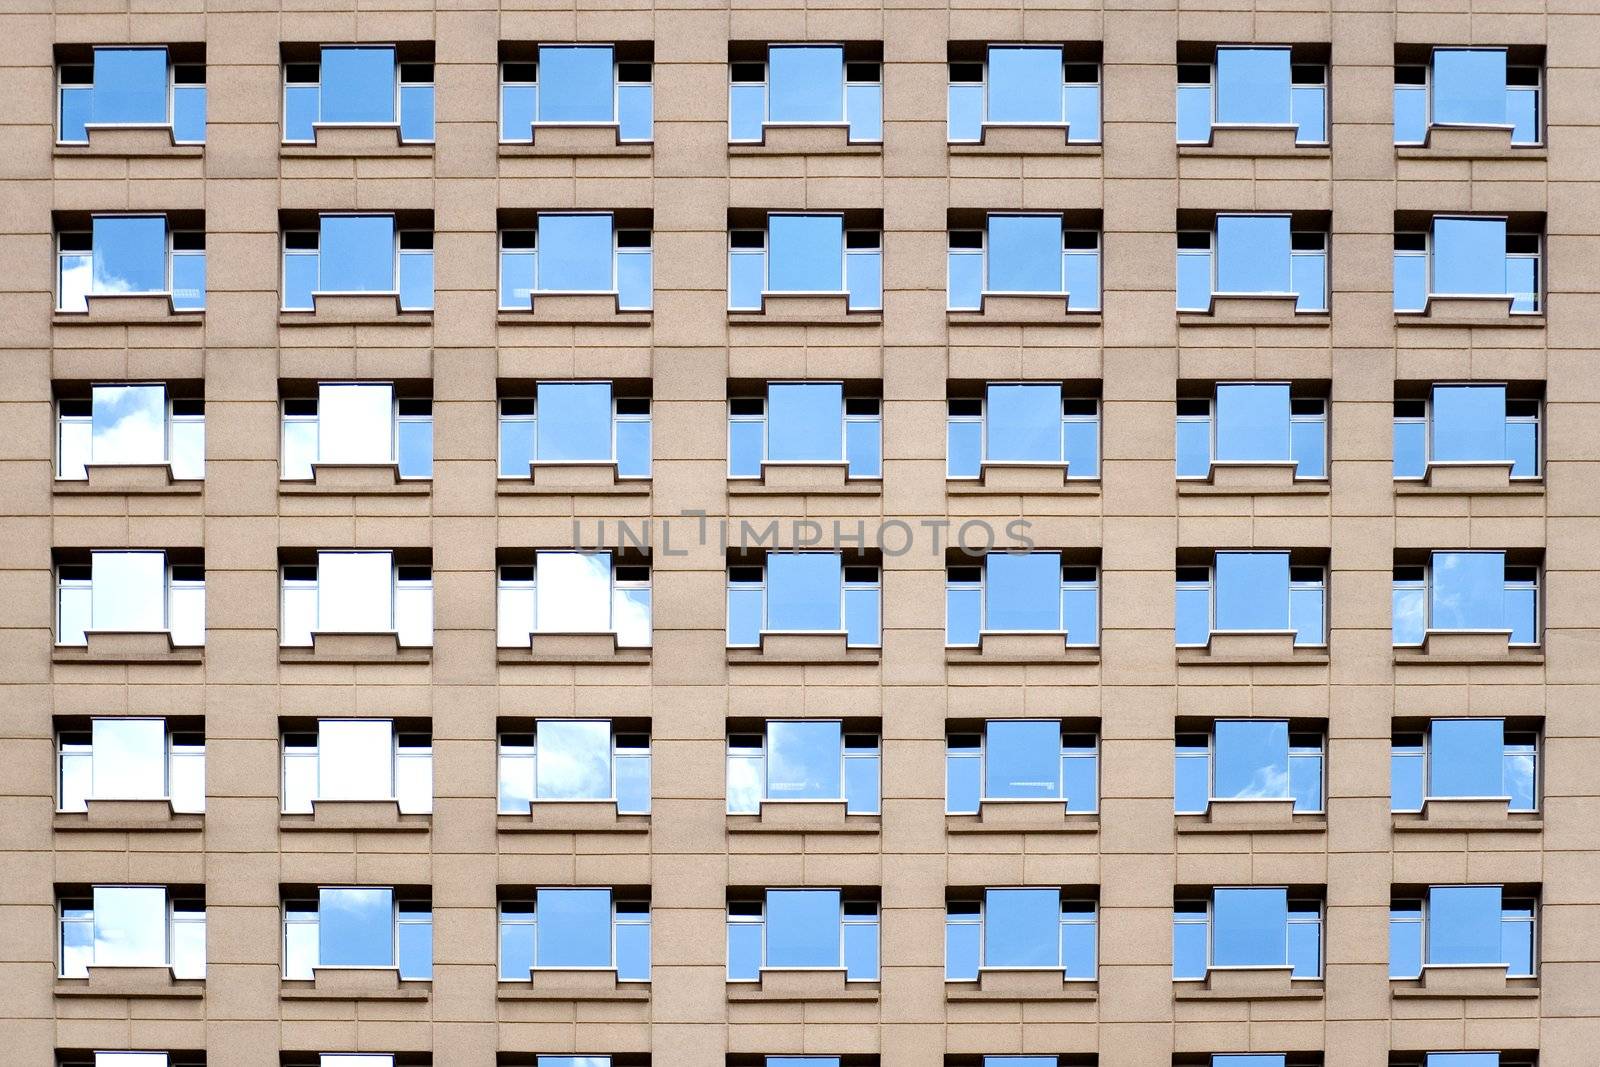 Windows of a Modern Building by shariffc